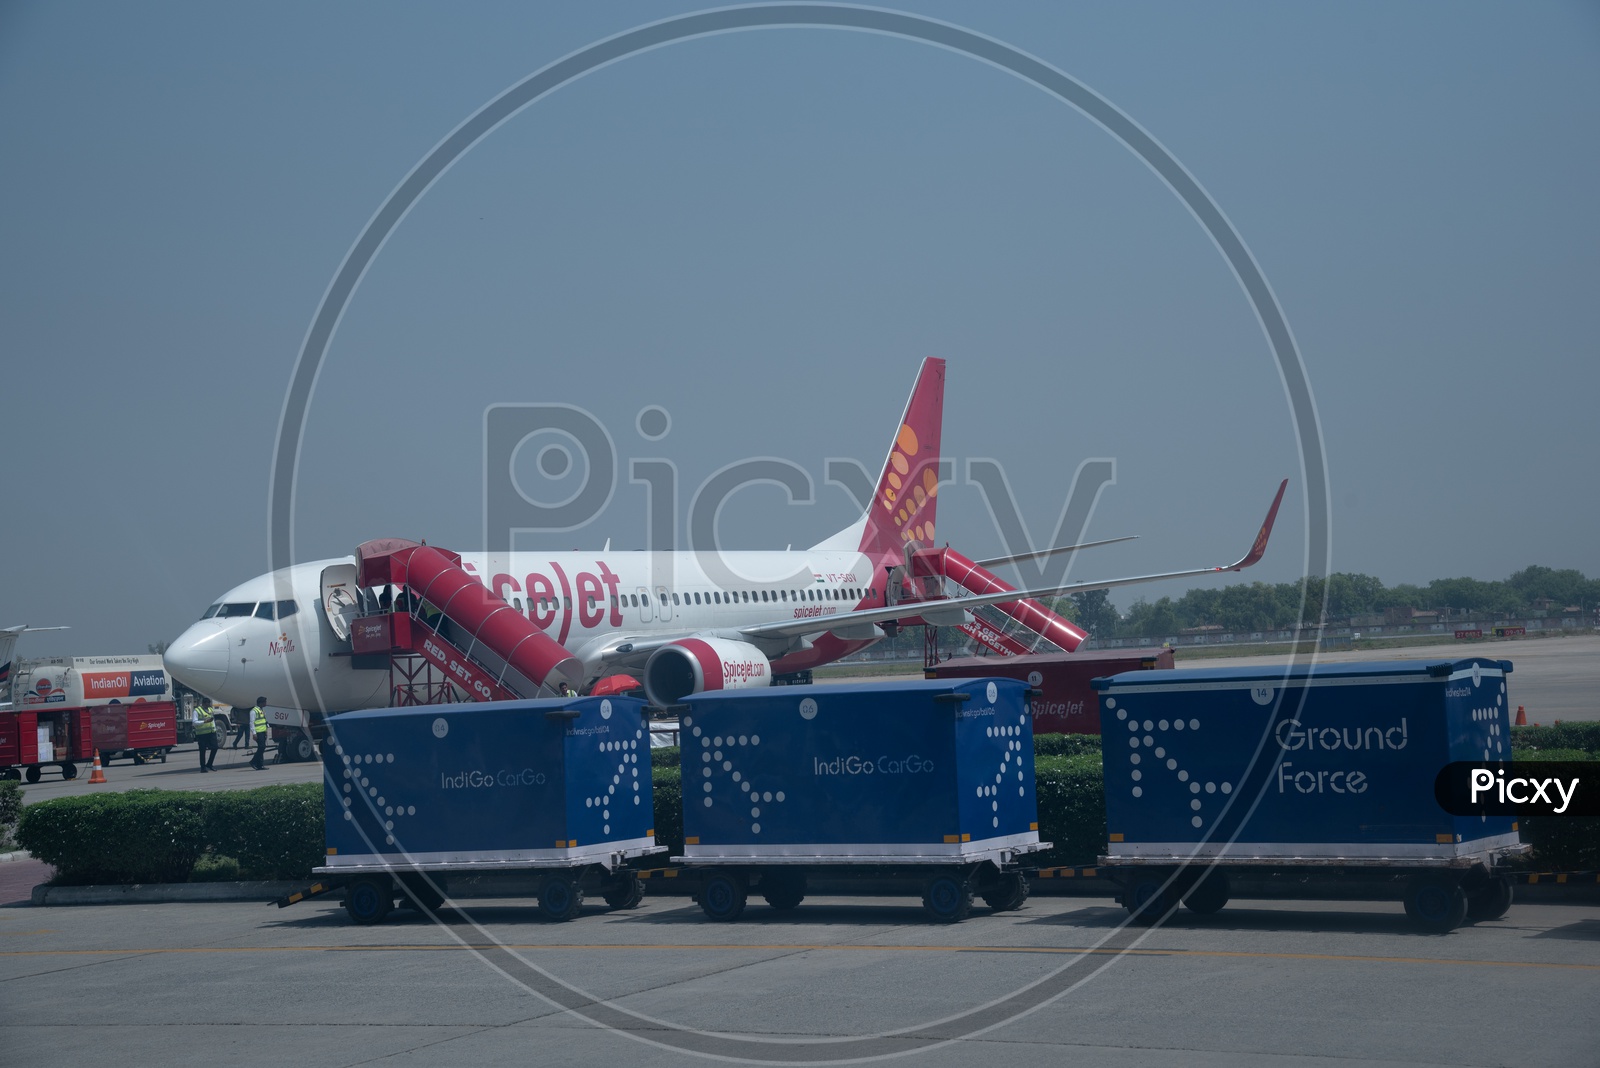 Spice Jet Plane Parking In a Airport